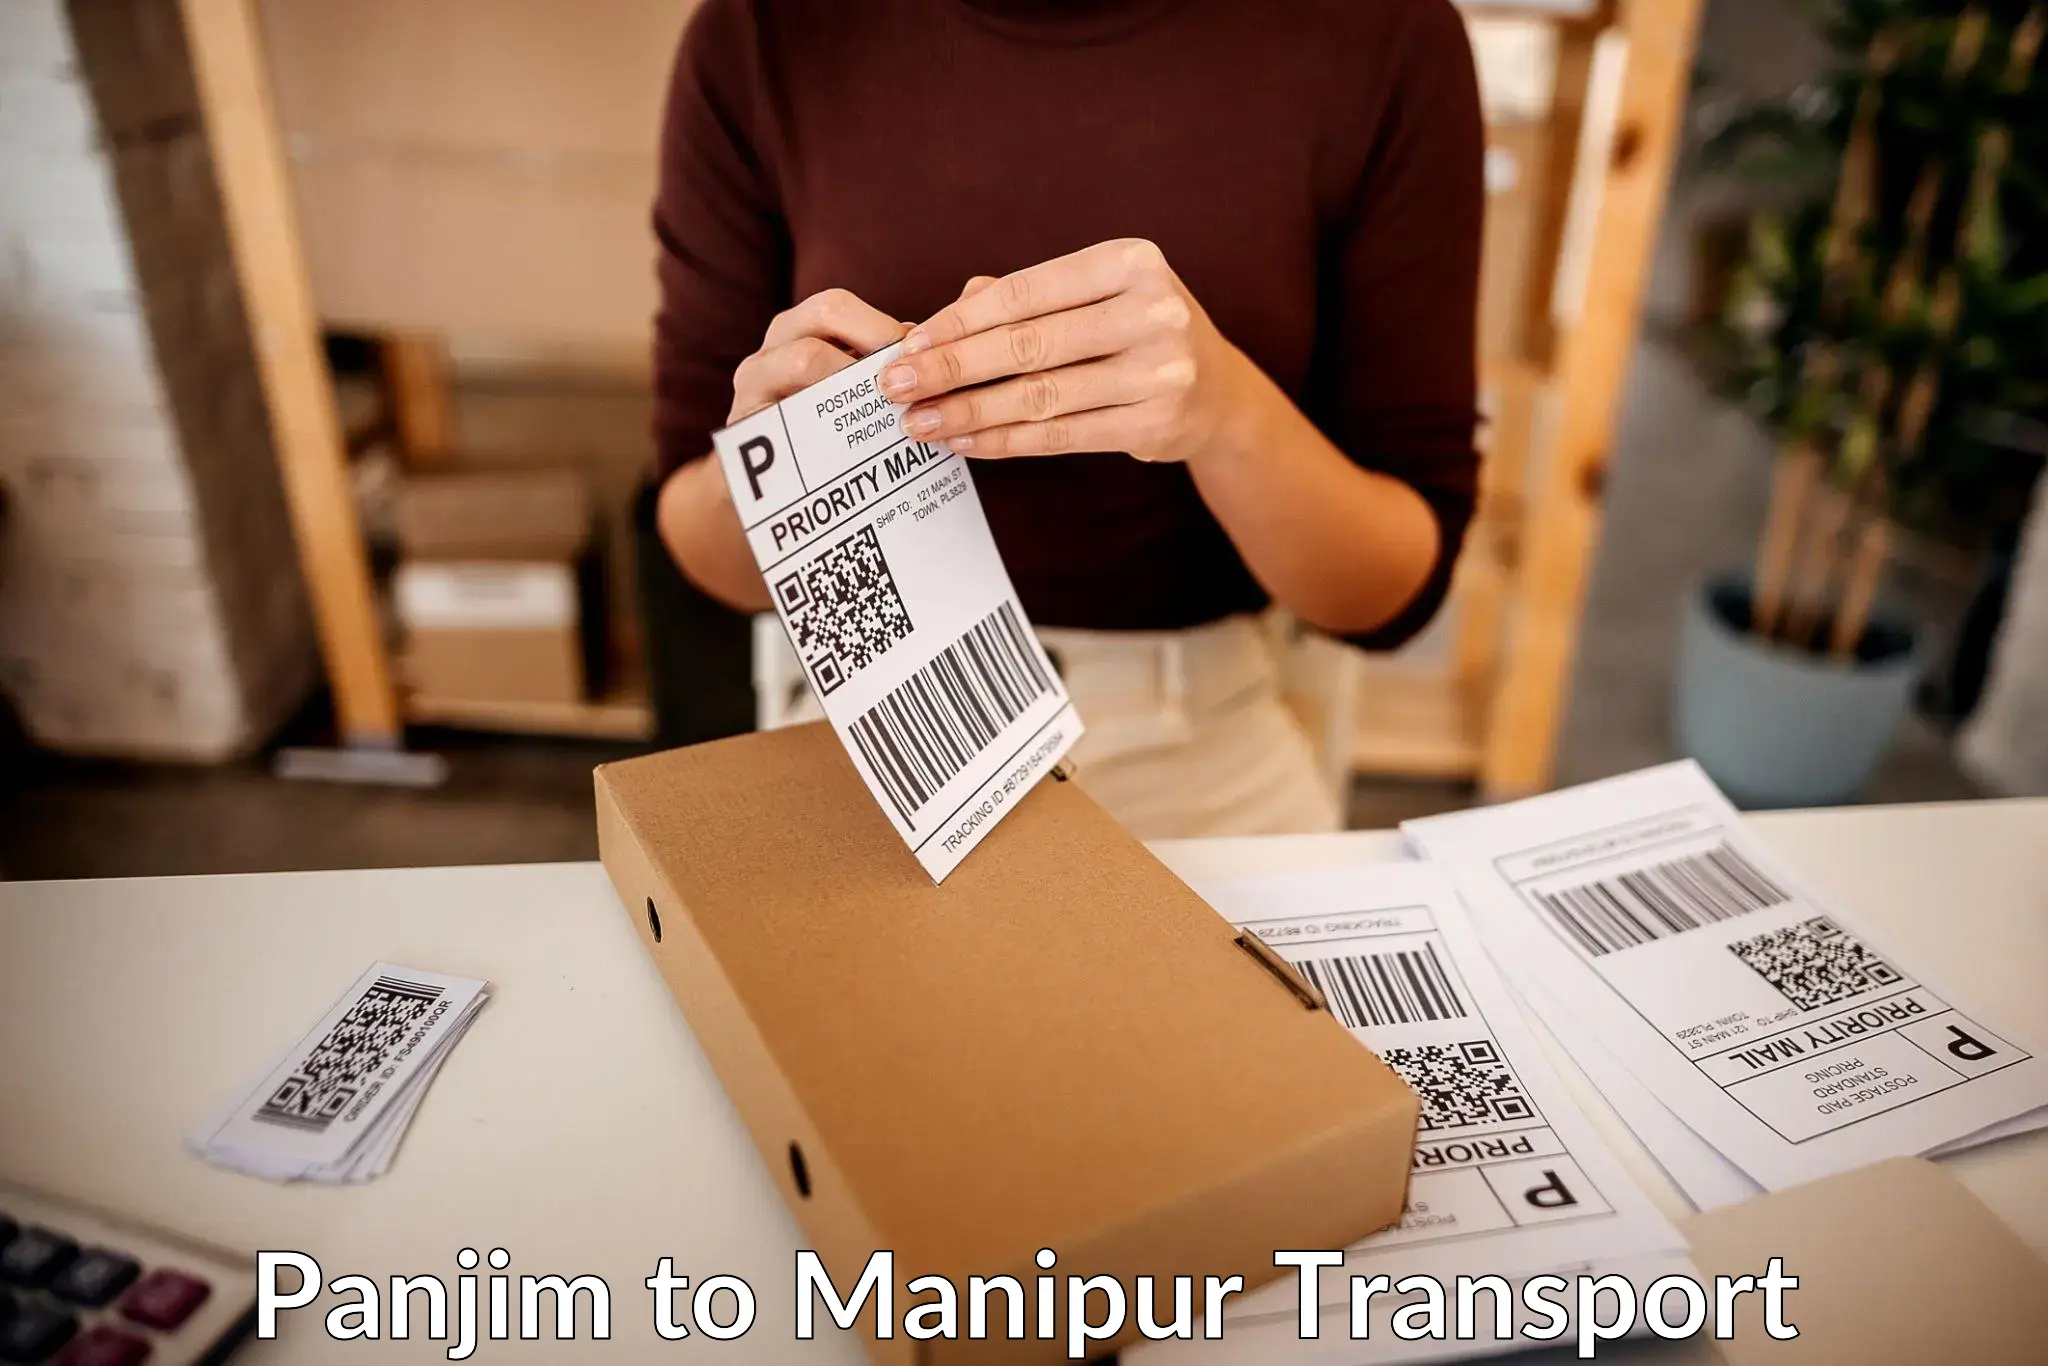 Delivery service Panjim to Manipur